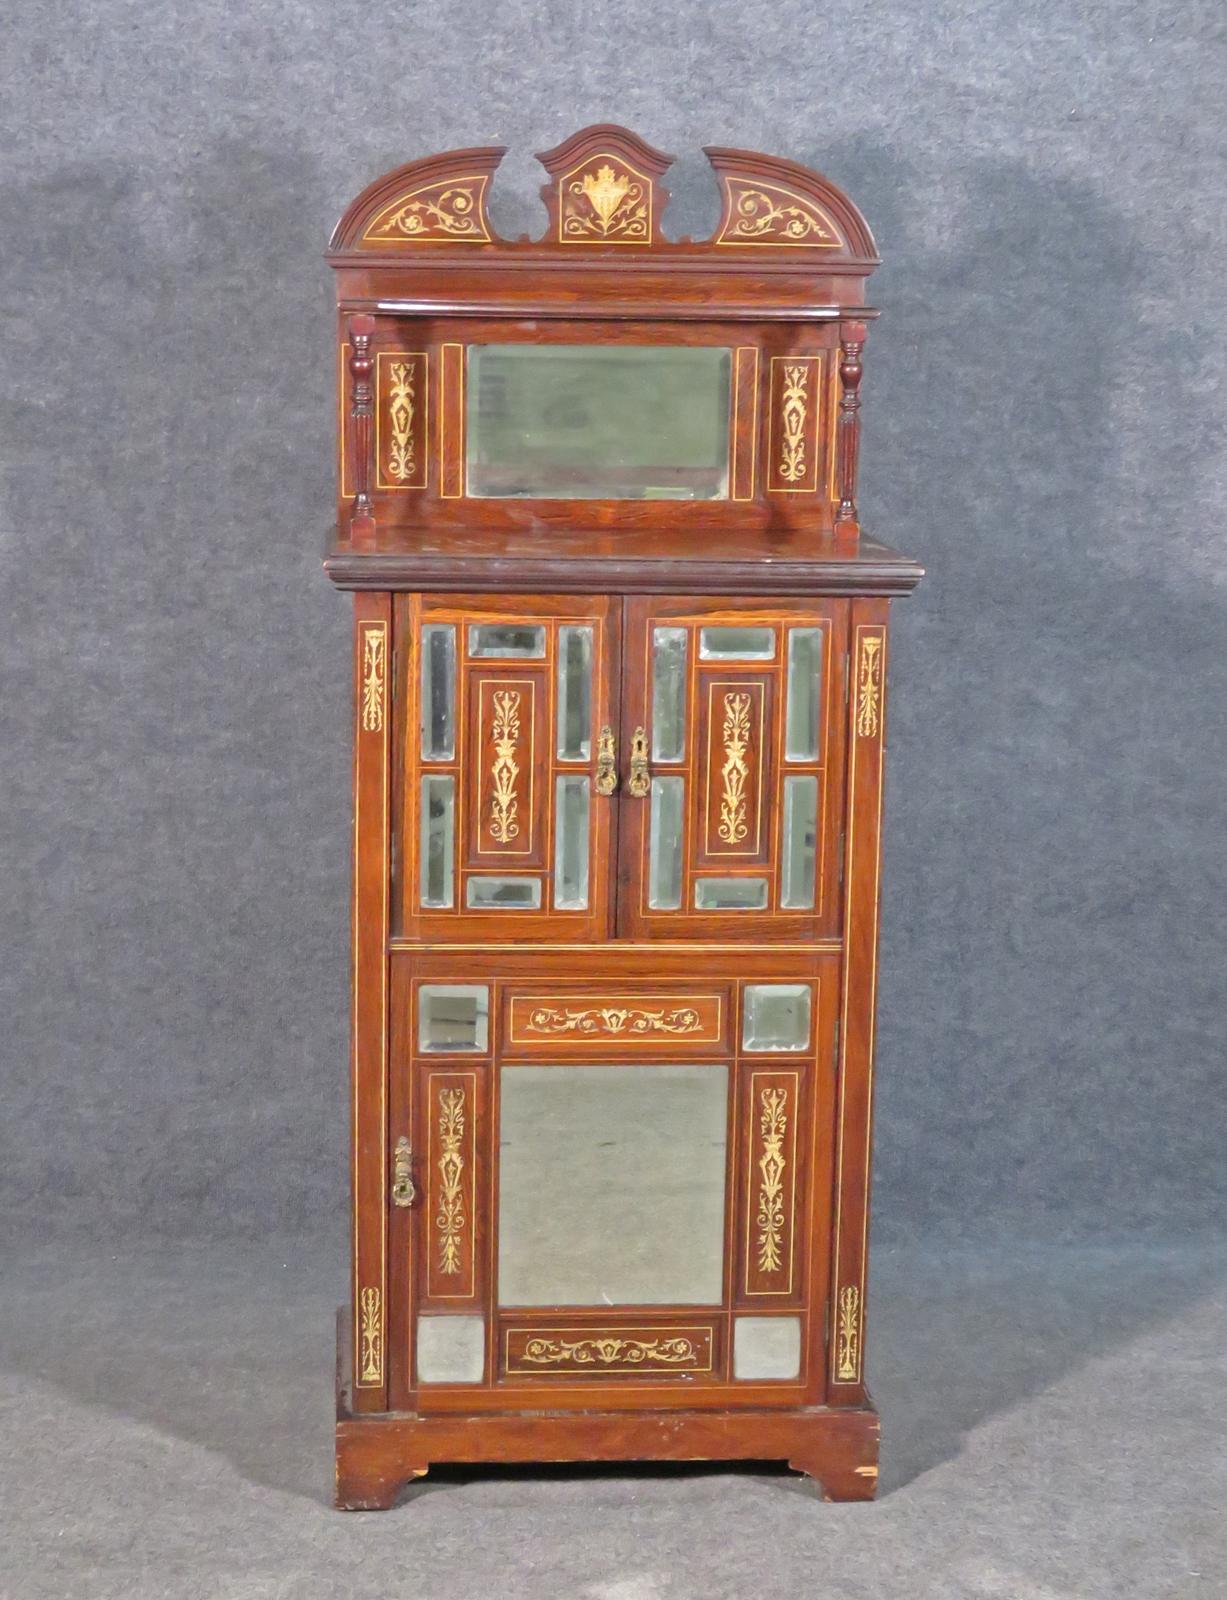 Rosewood. Inlaid. Mirrored panels. Superstructure. 58 3/4